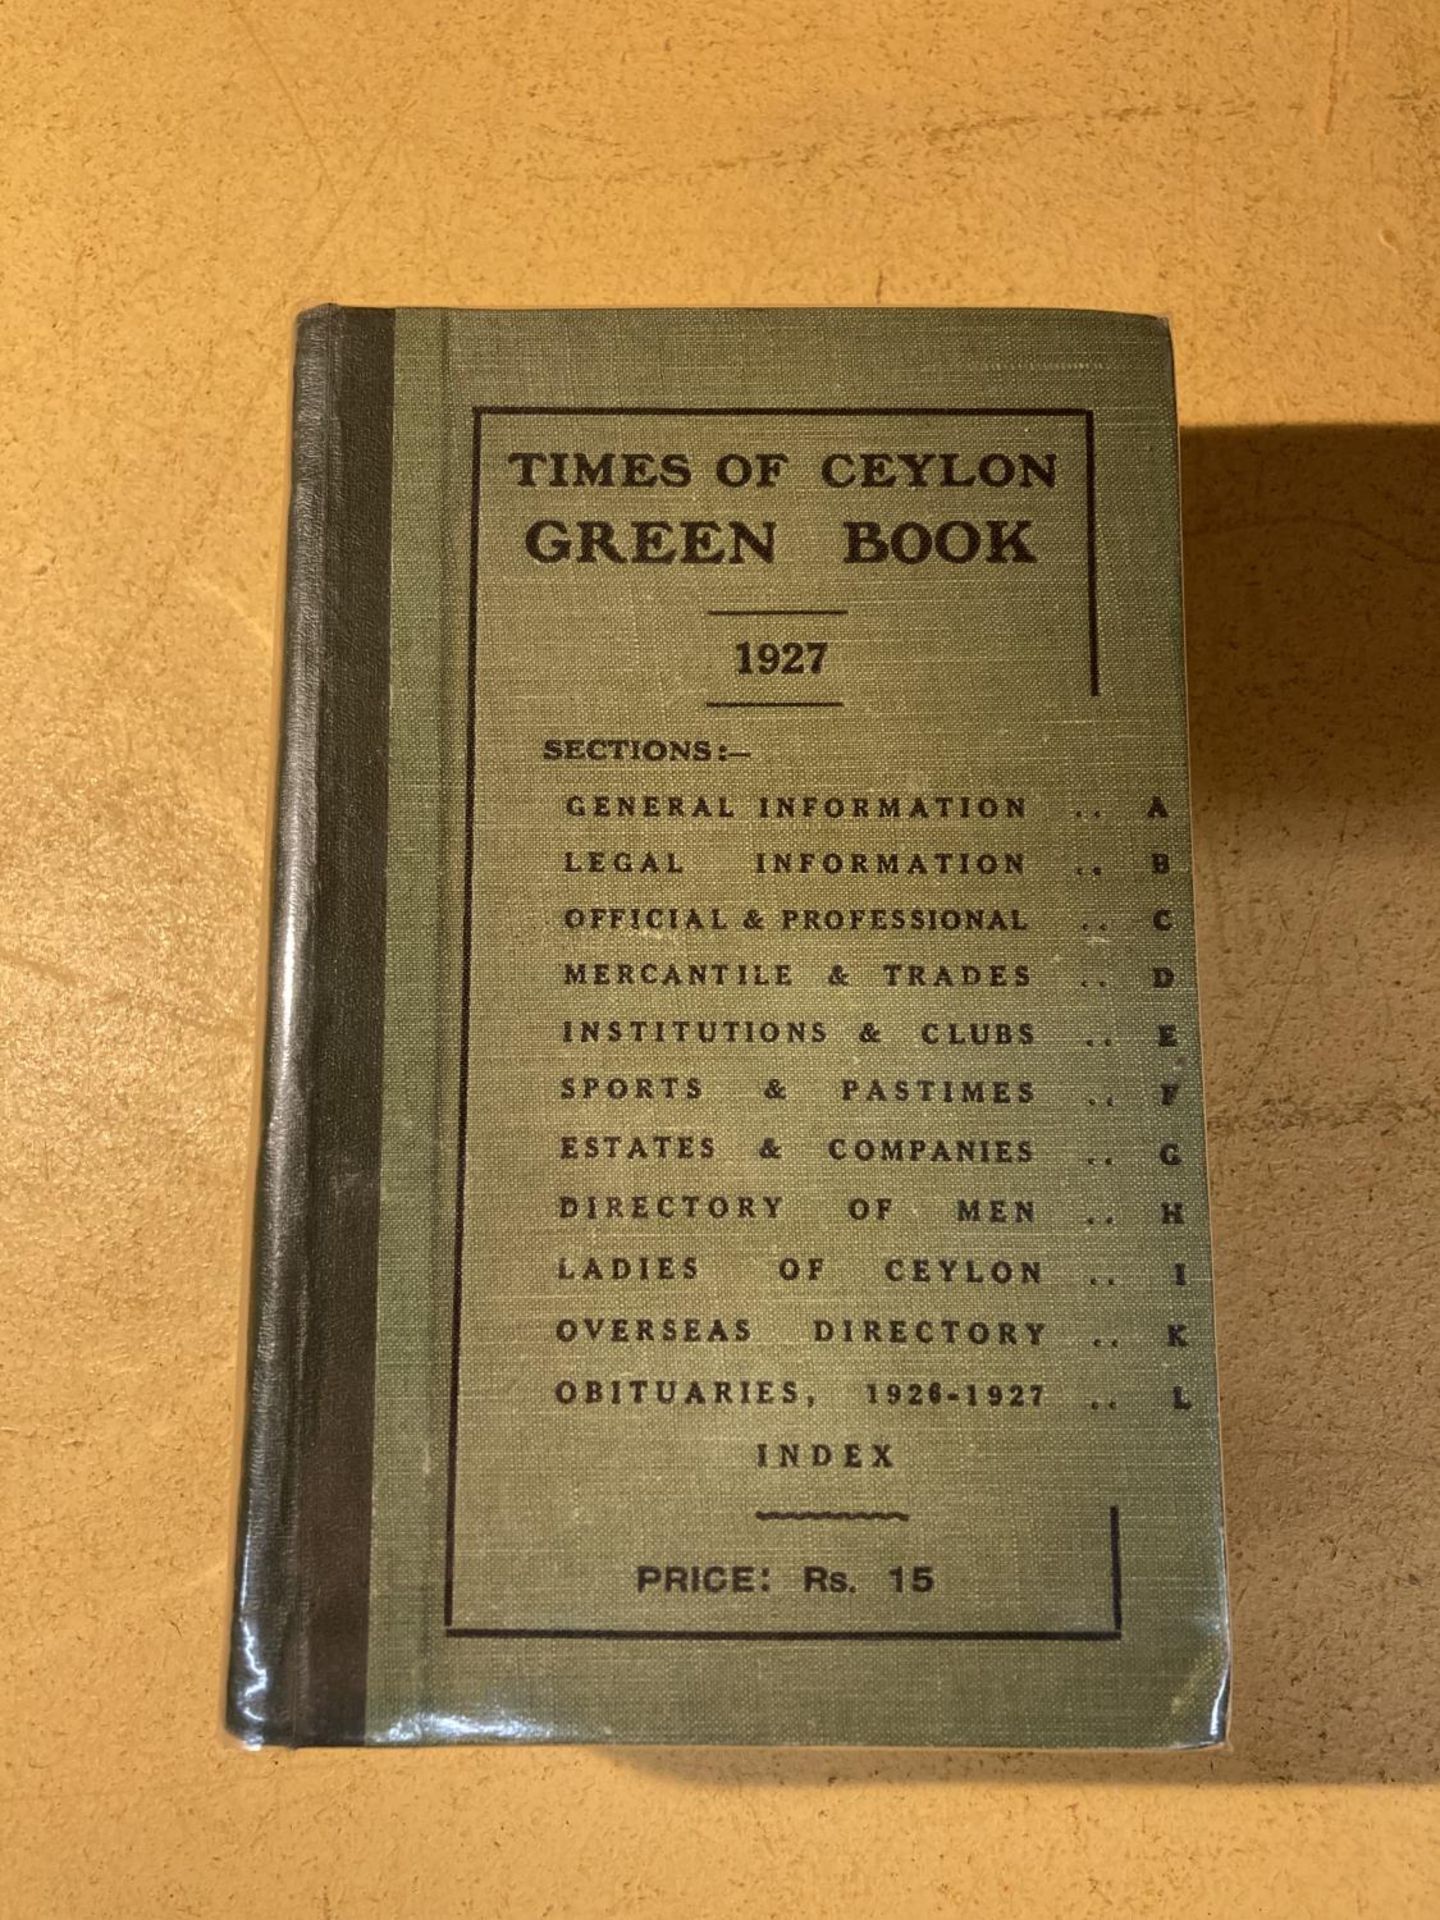 A TIMES OF CEYLON GREEN BOOK 1927 IN A PROTECTIVE CLEAR WRAPPER, PUBLISHED BY BLACKFRIAR HOUSE